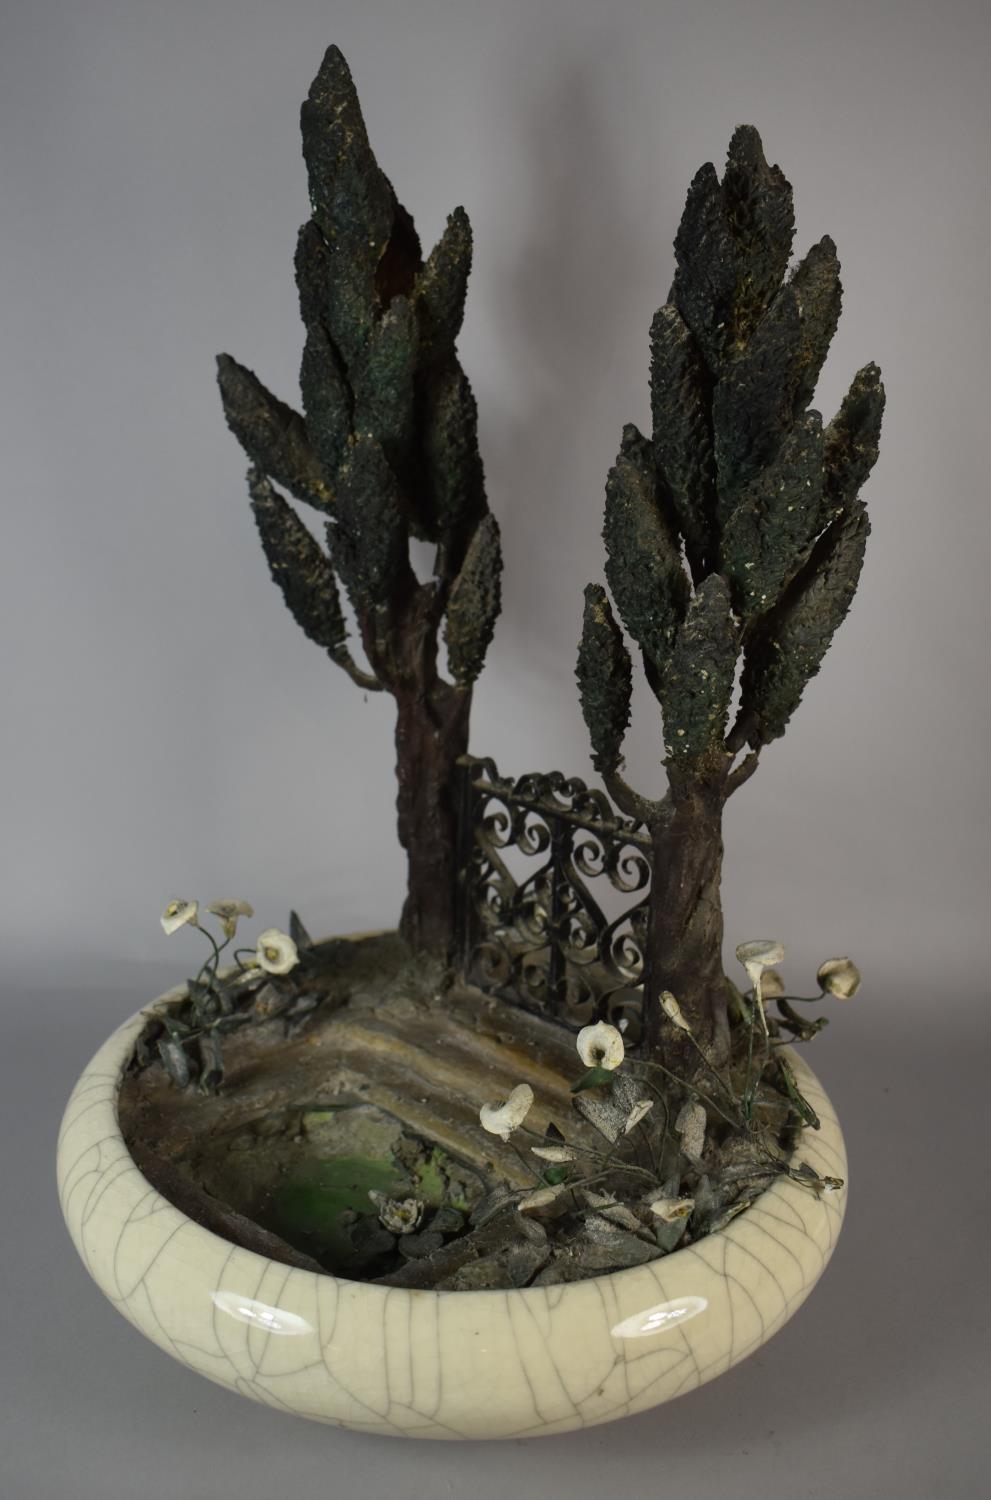 A Vintage Crackle Glaze Shallow Bowl Housing Holly Tree and Gate Diorama with Illuminated Pool, 31cm - Image 2 of 3